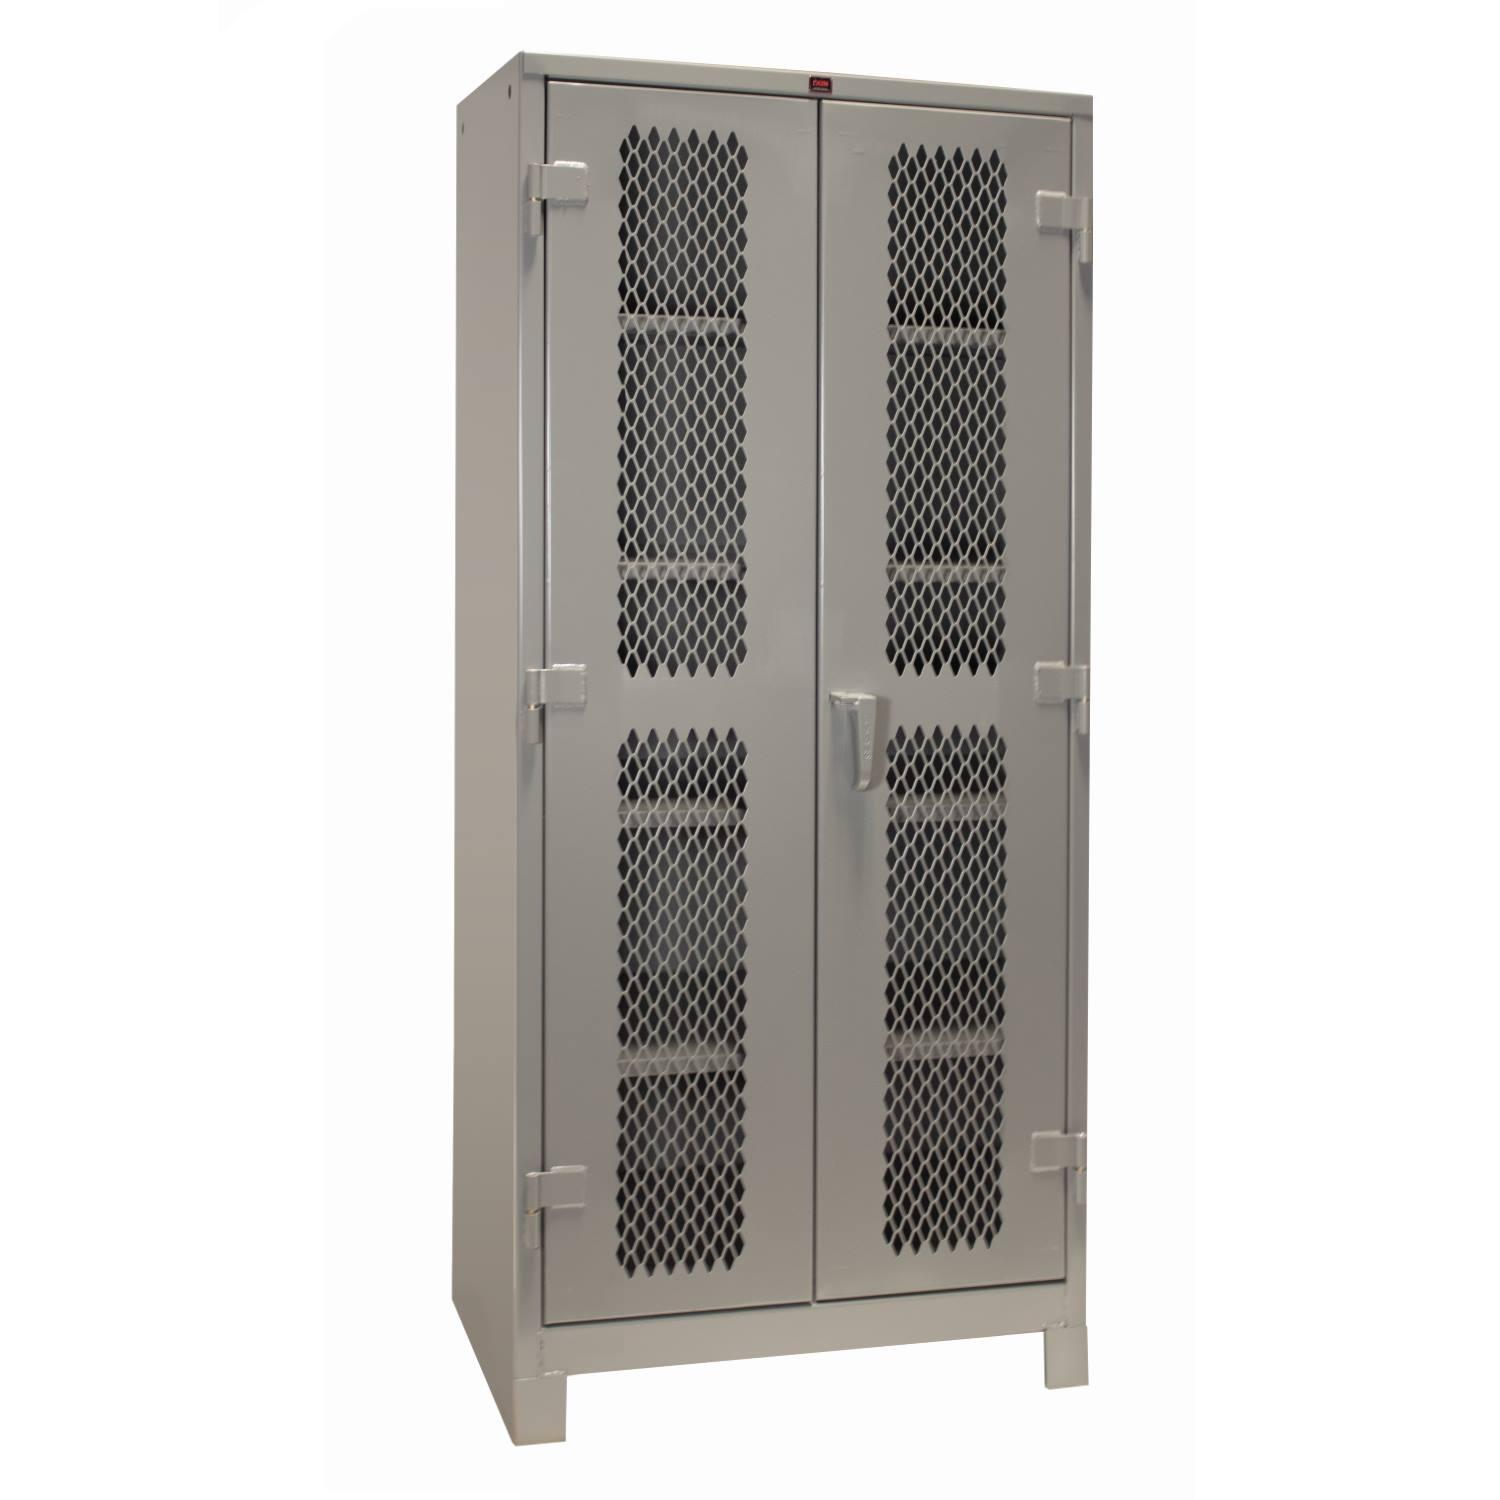 Ventilated Storage Cabinets